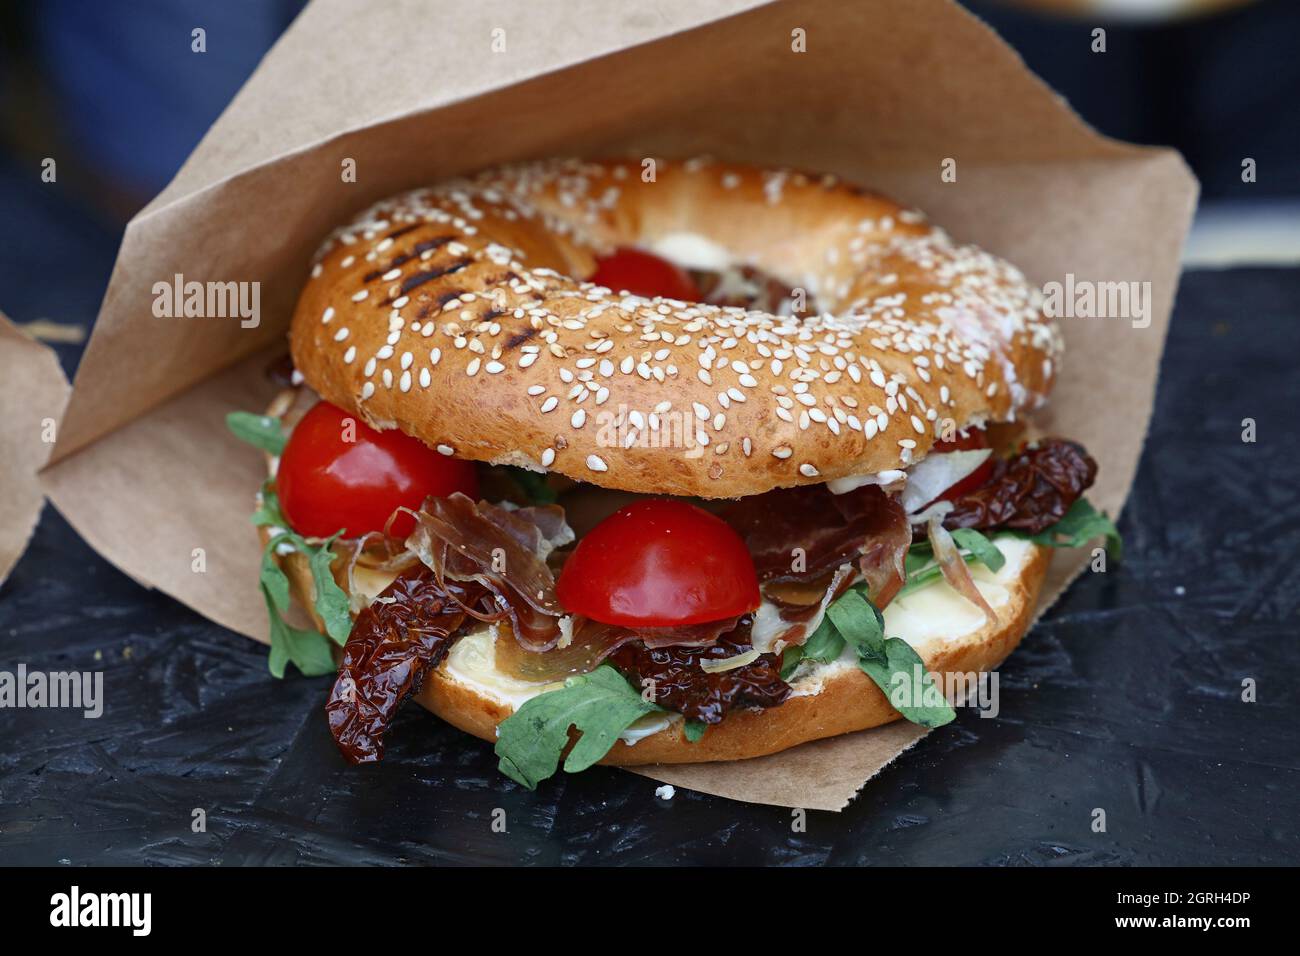 Close-up Of Burger In Paper Bag On Table Stock Photo